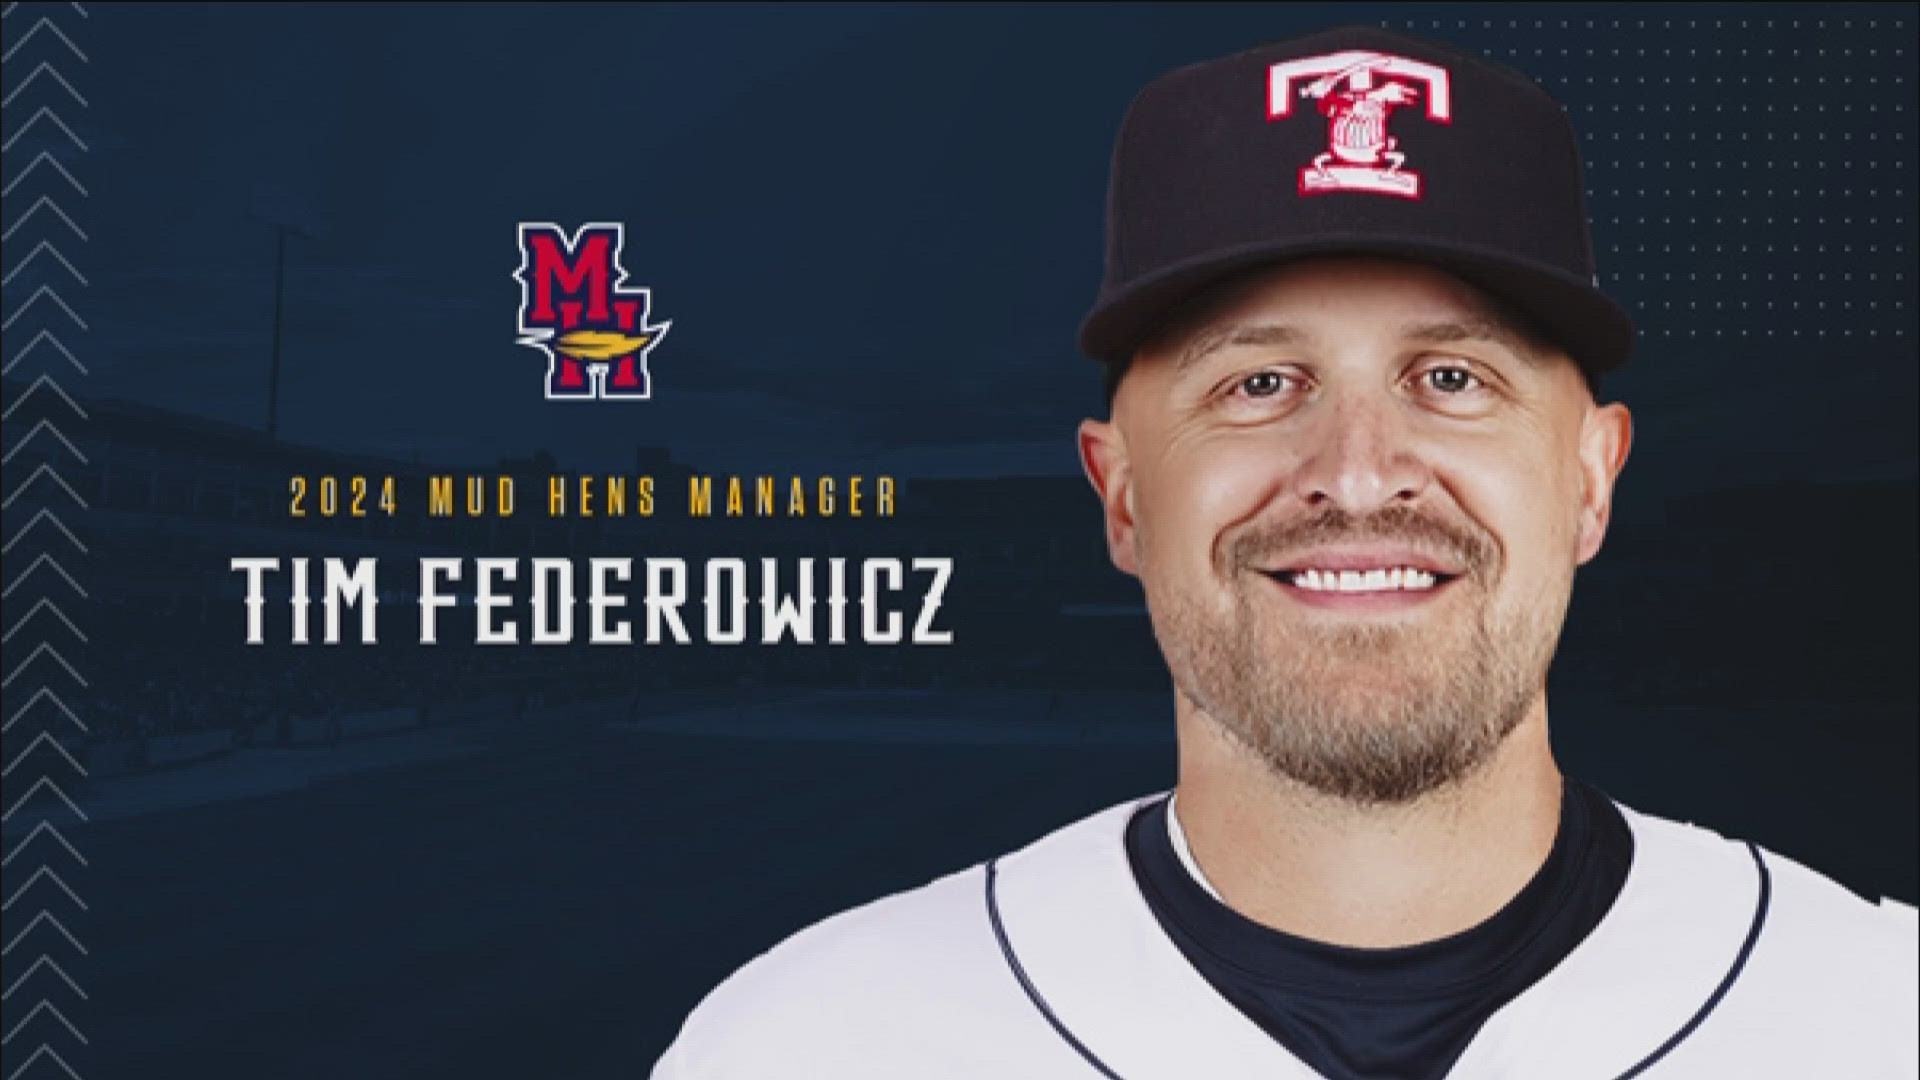 Tim Federowicz was formerly a catching coach for the Detroit Tigers.